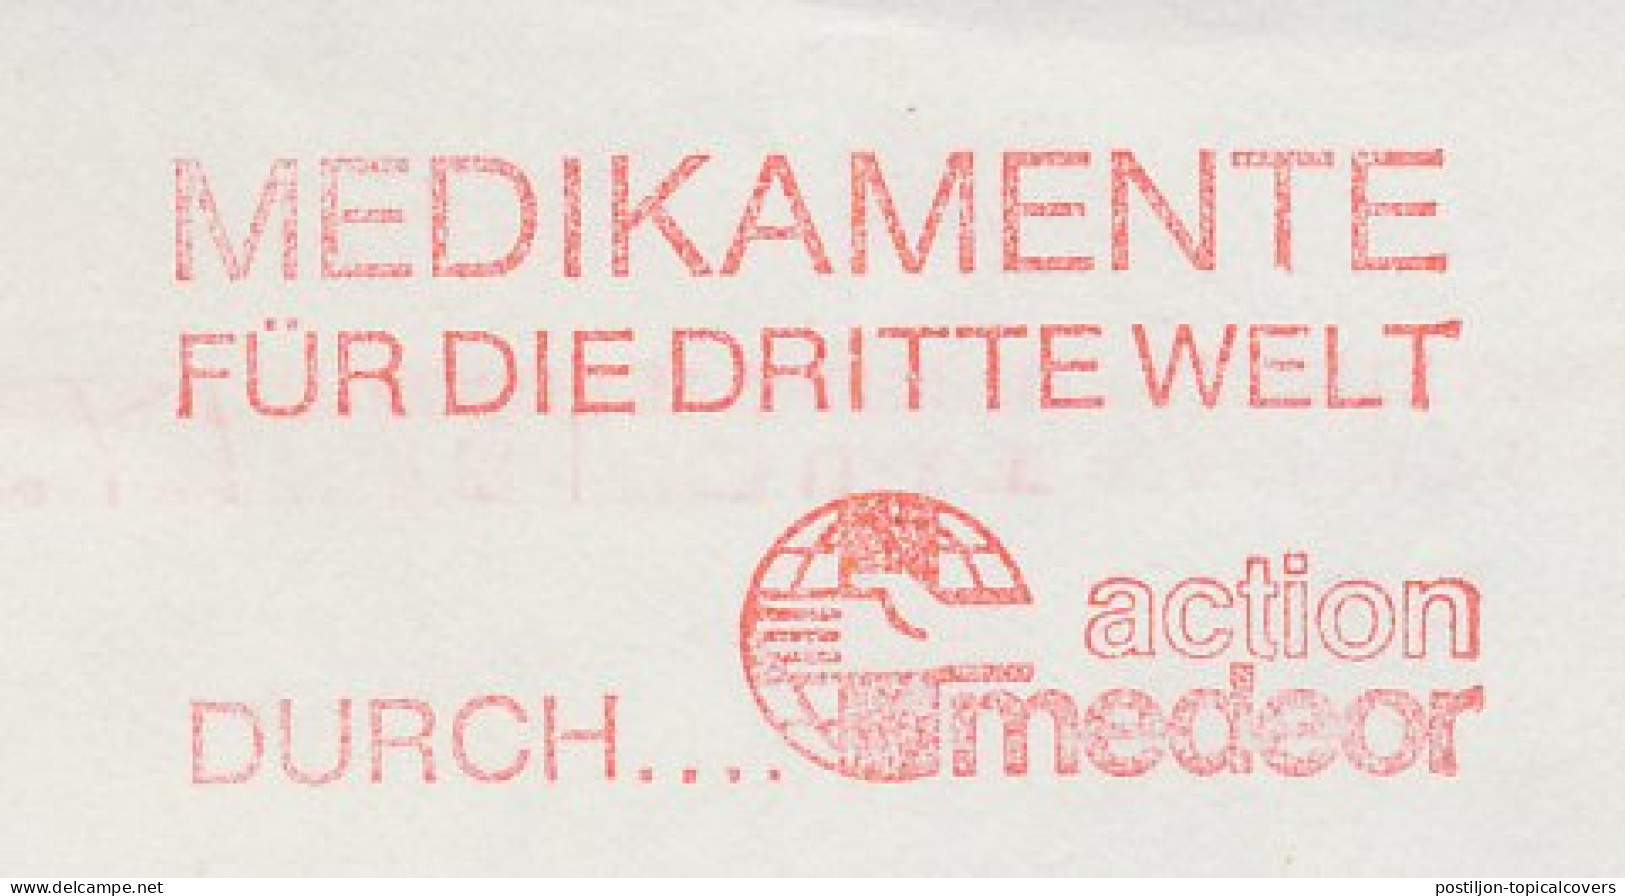 Meter Cut Germany Medicine For The Third World - Farmacia